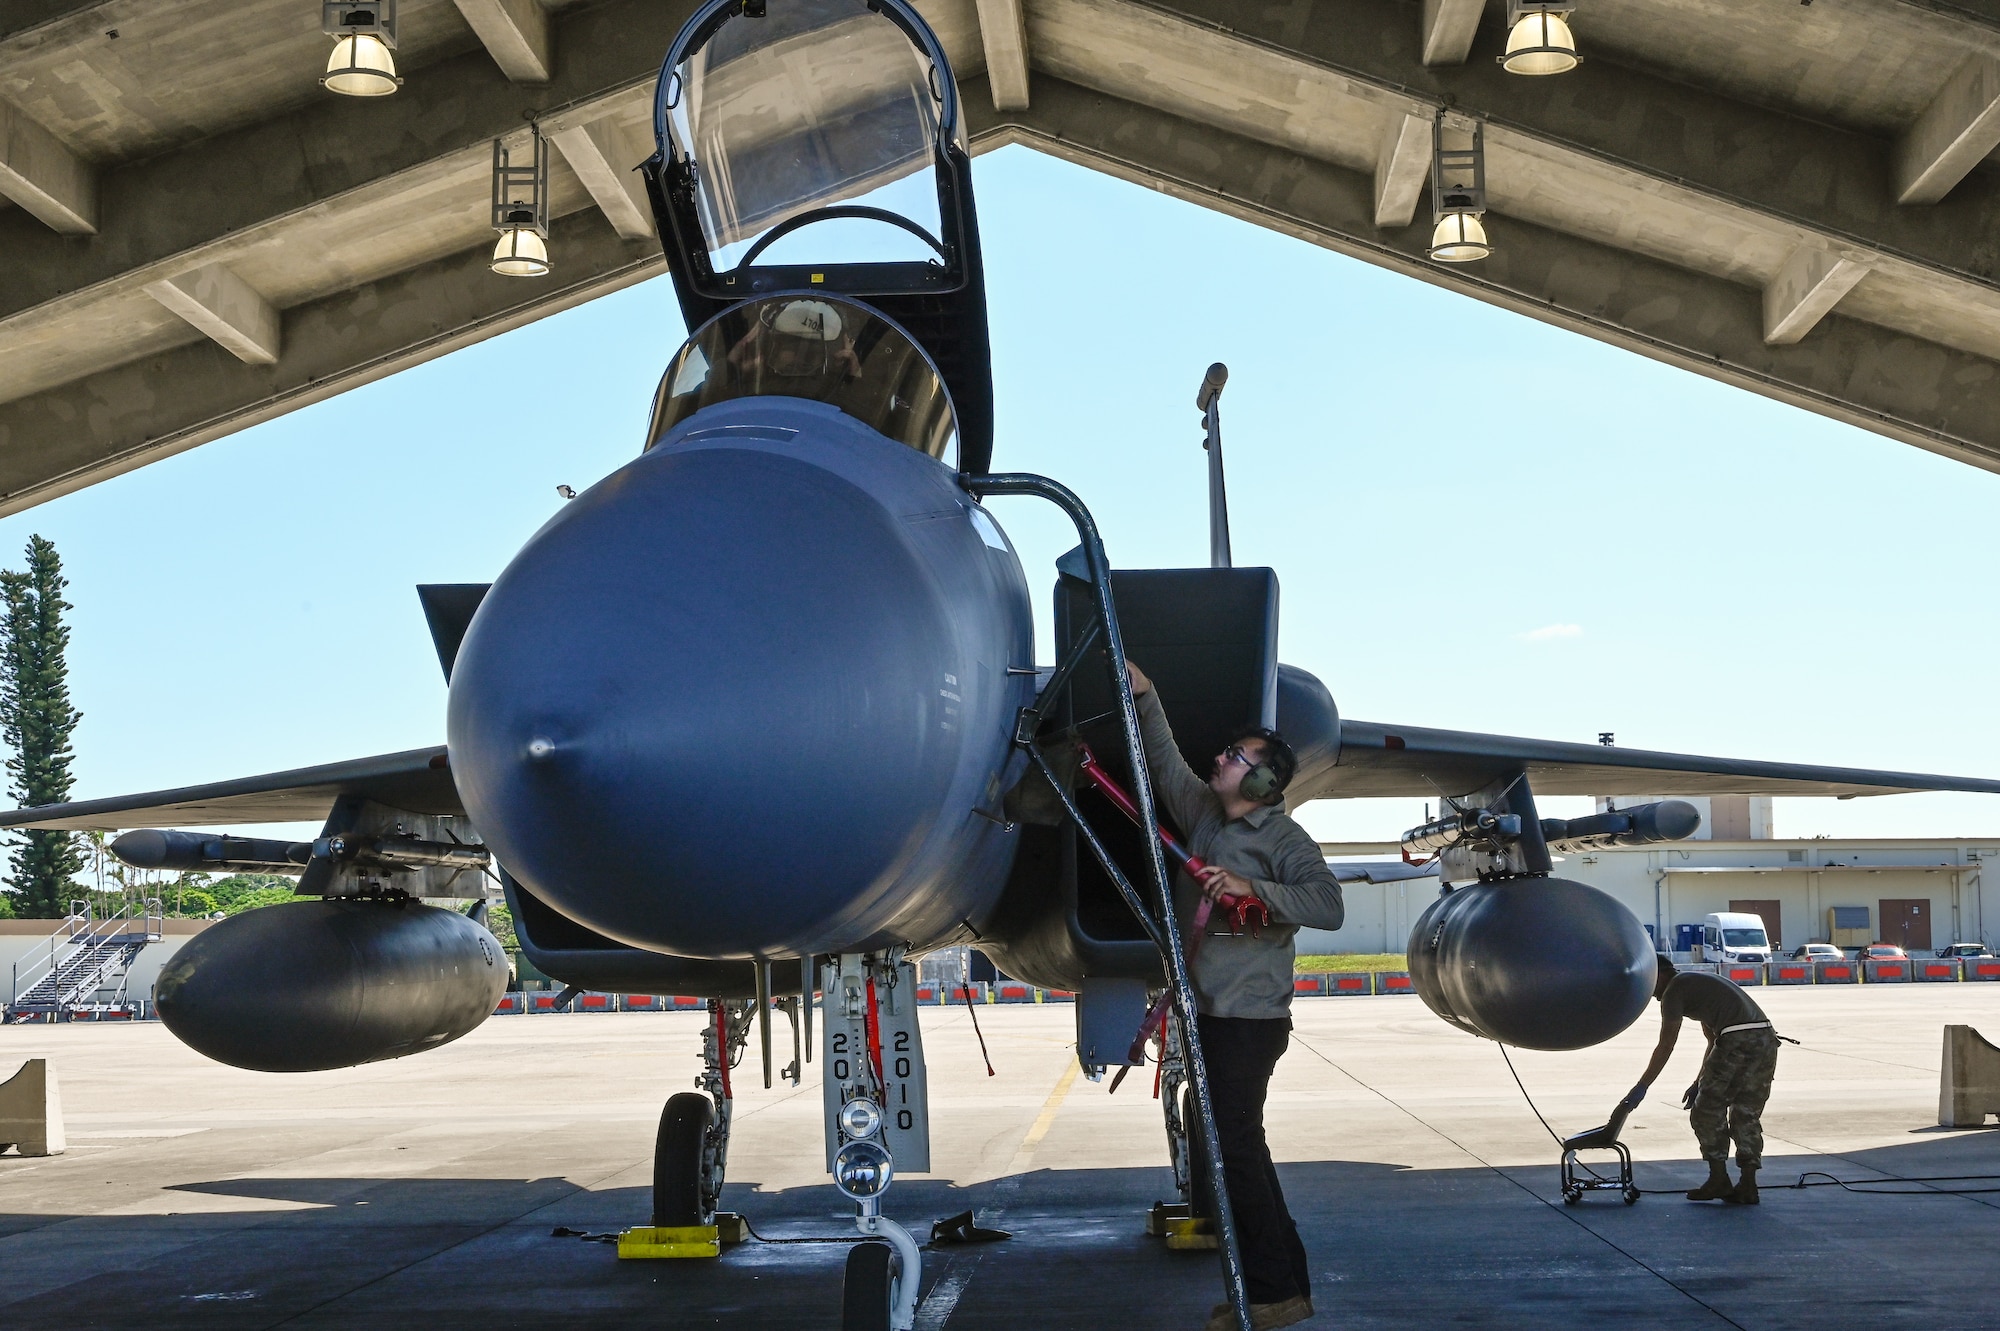 Airmen prepare an F-15C fighter jet for take off